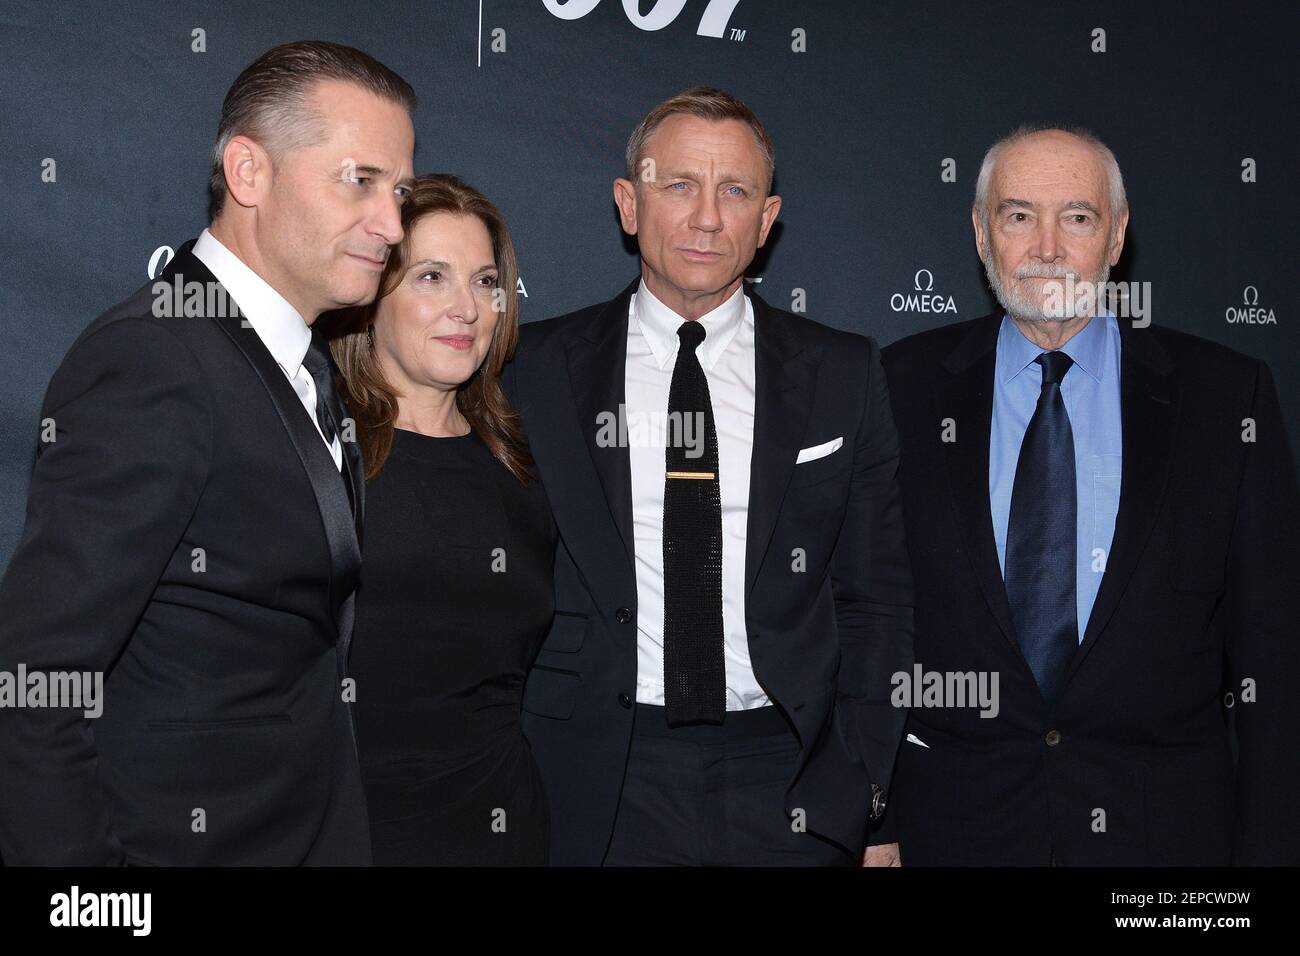 L-R) Raynald Aeschlimann, President and CEO of Omega, Barbara Broccoli,  actor Daniel Craig and Producer Michael G. Wilson attend the launch of the  new “Bond” watch by Omega in cunjuction with the